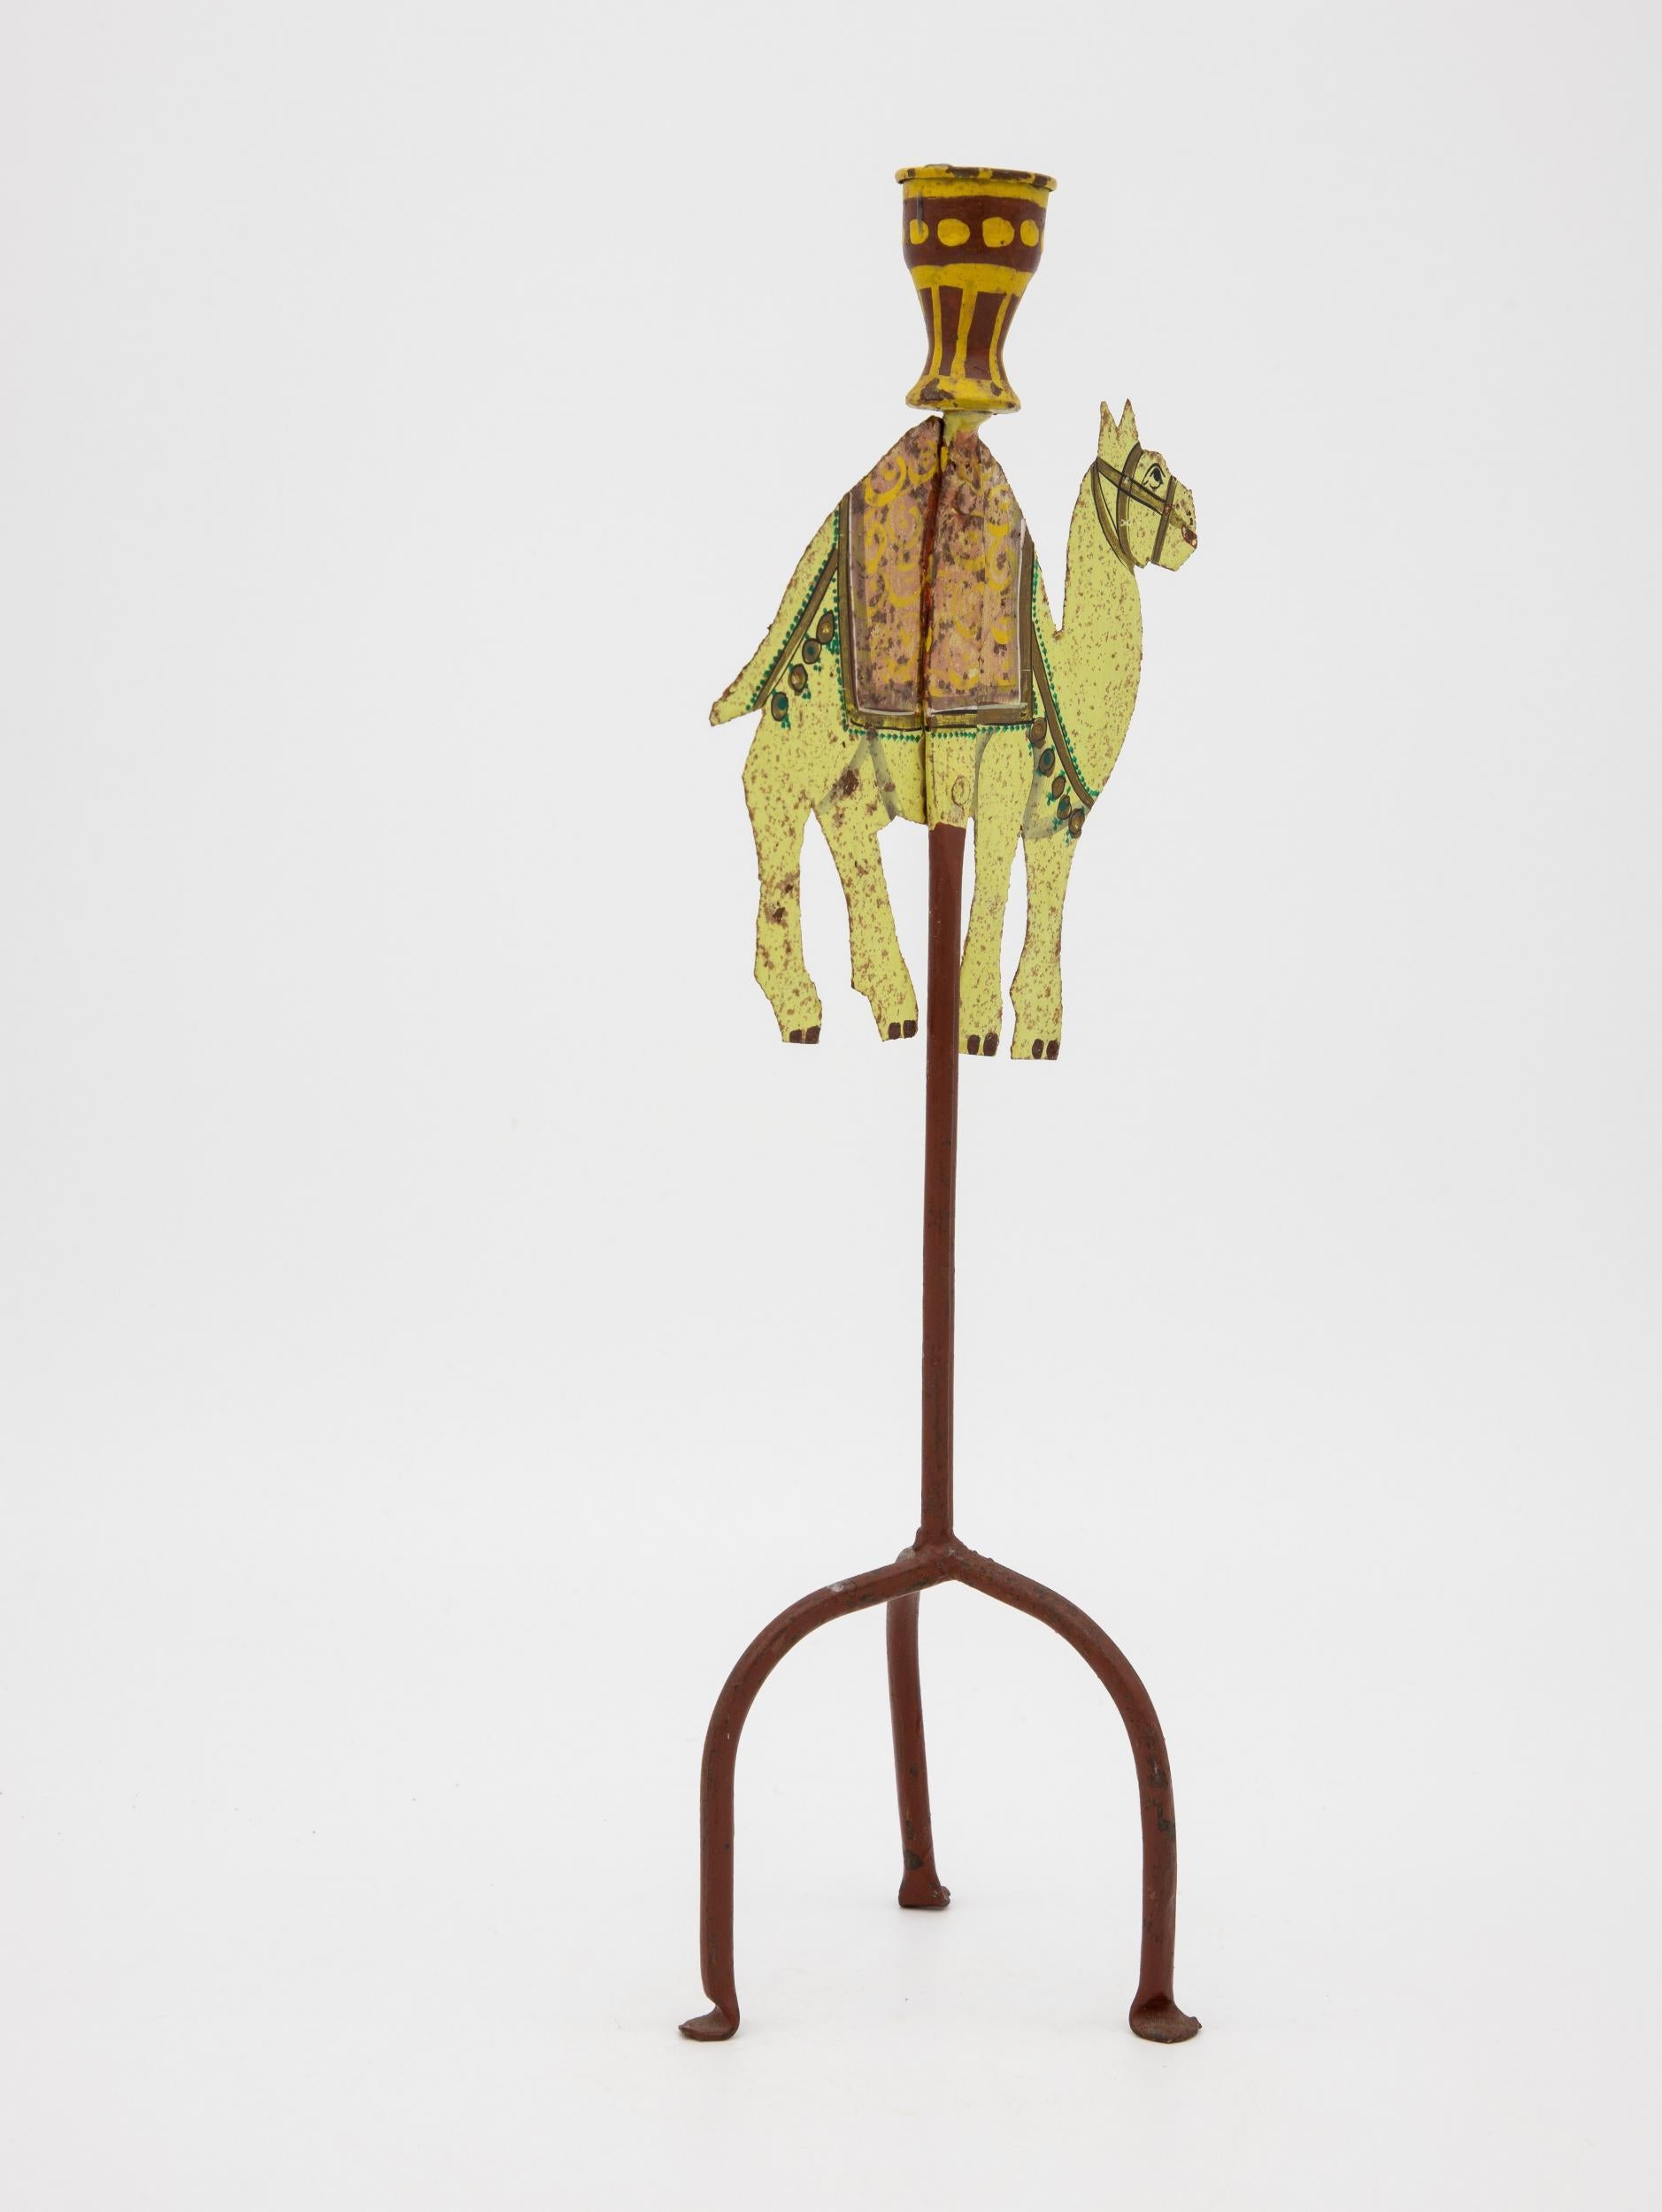 A single metal painted candlestick ca. 1910 in the shape of a camel. This camel is painted in brilliant yellow, red, orange, and green featuring a decorative saddle and bridle. Painted on both sides. Three legs with flat feet.